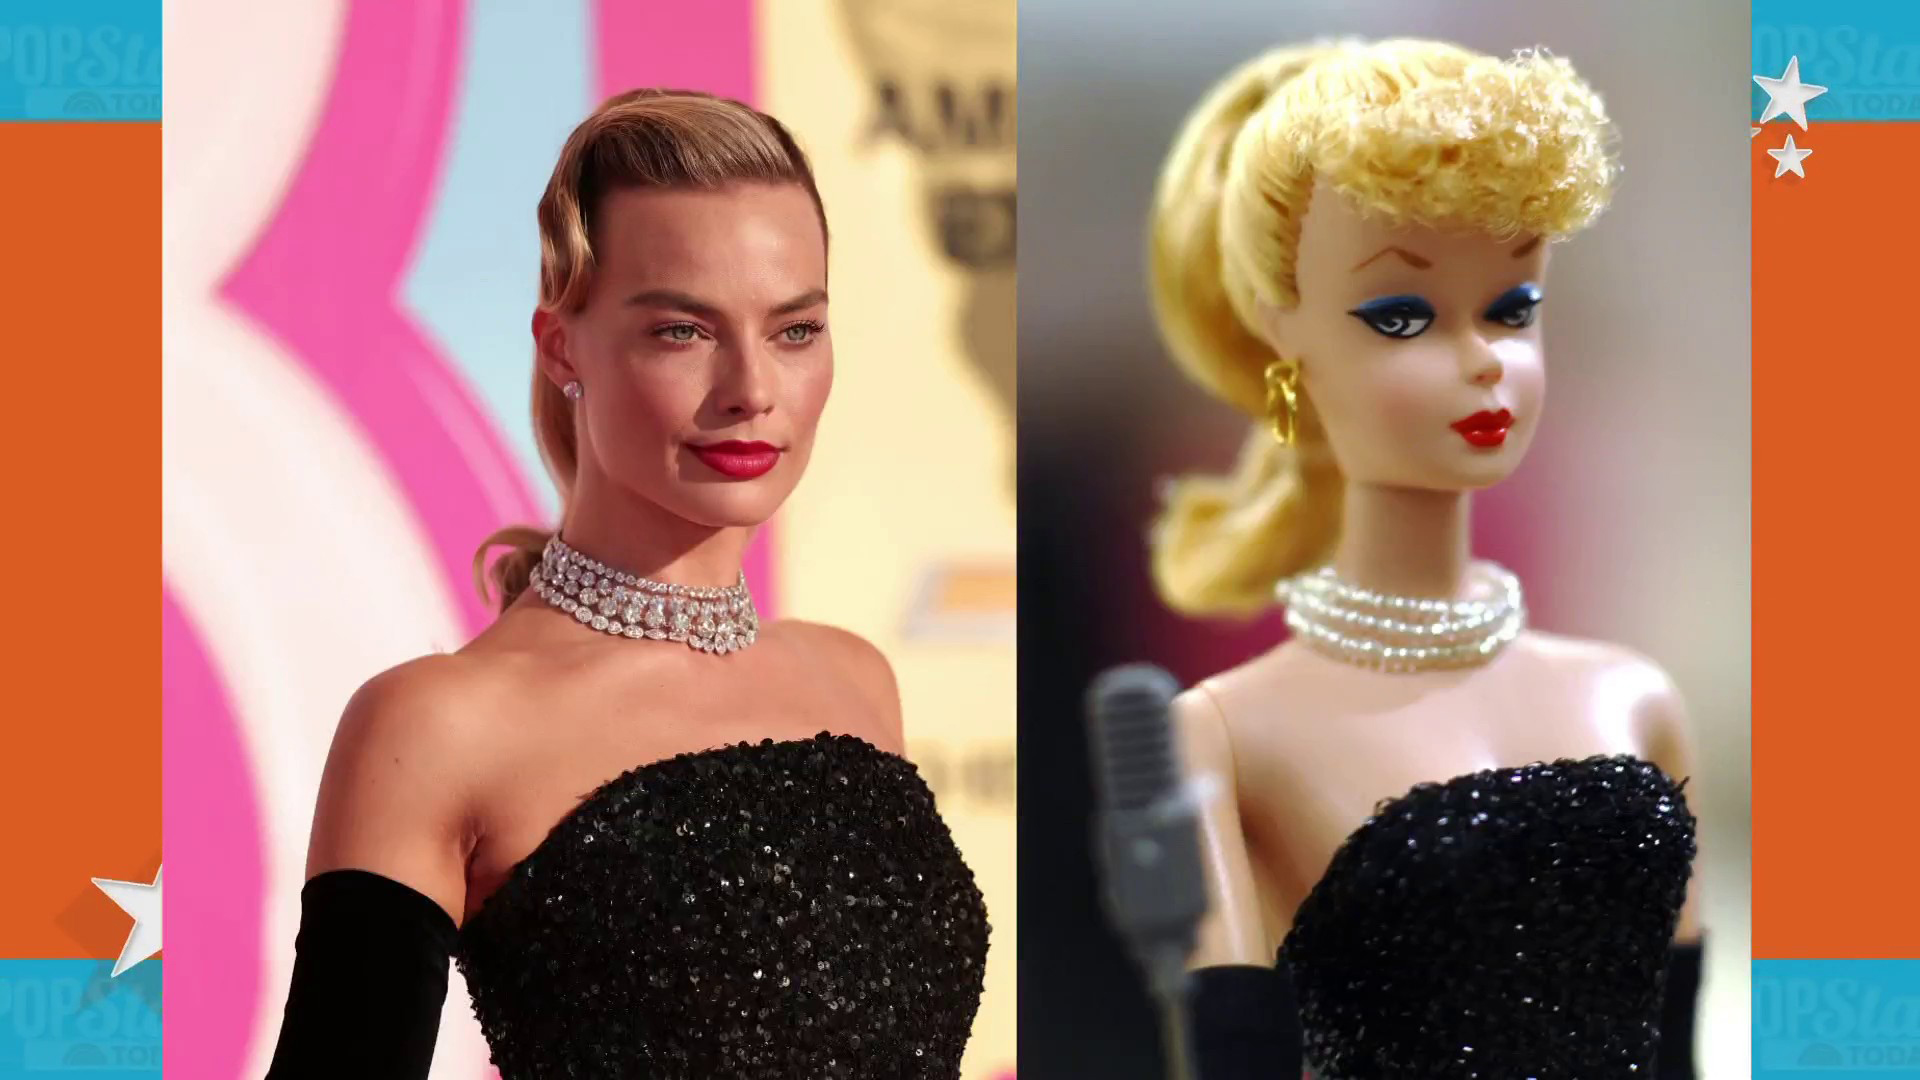 Barb, Barbara, Barbie: Mattel's iconic doll's name is shared by many